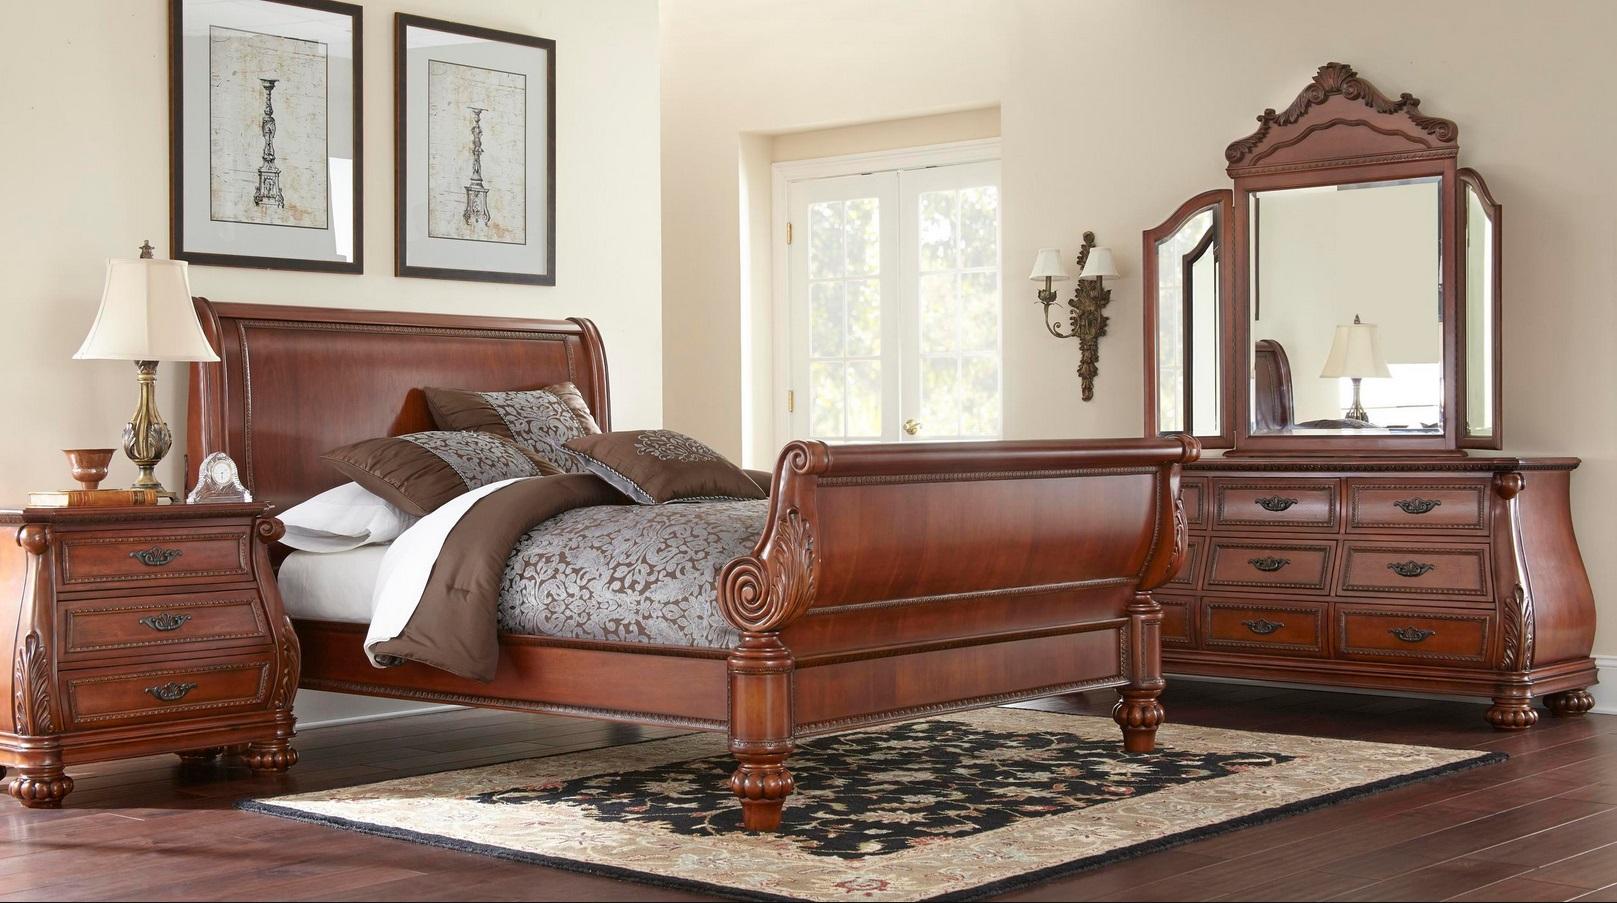 

    
Soflex Stevie Cherry Brown Wood King Sleigh Bedroom Set 4Pcs Classic Traditional
